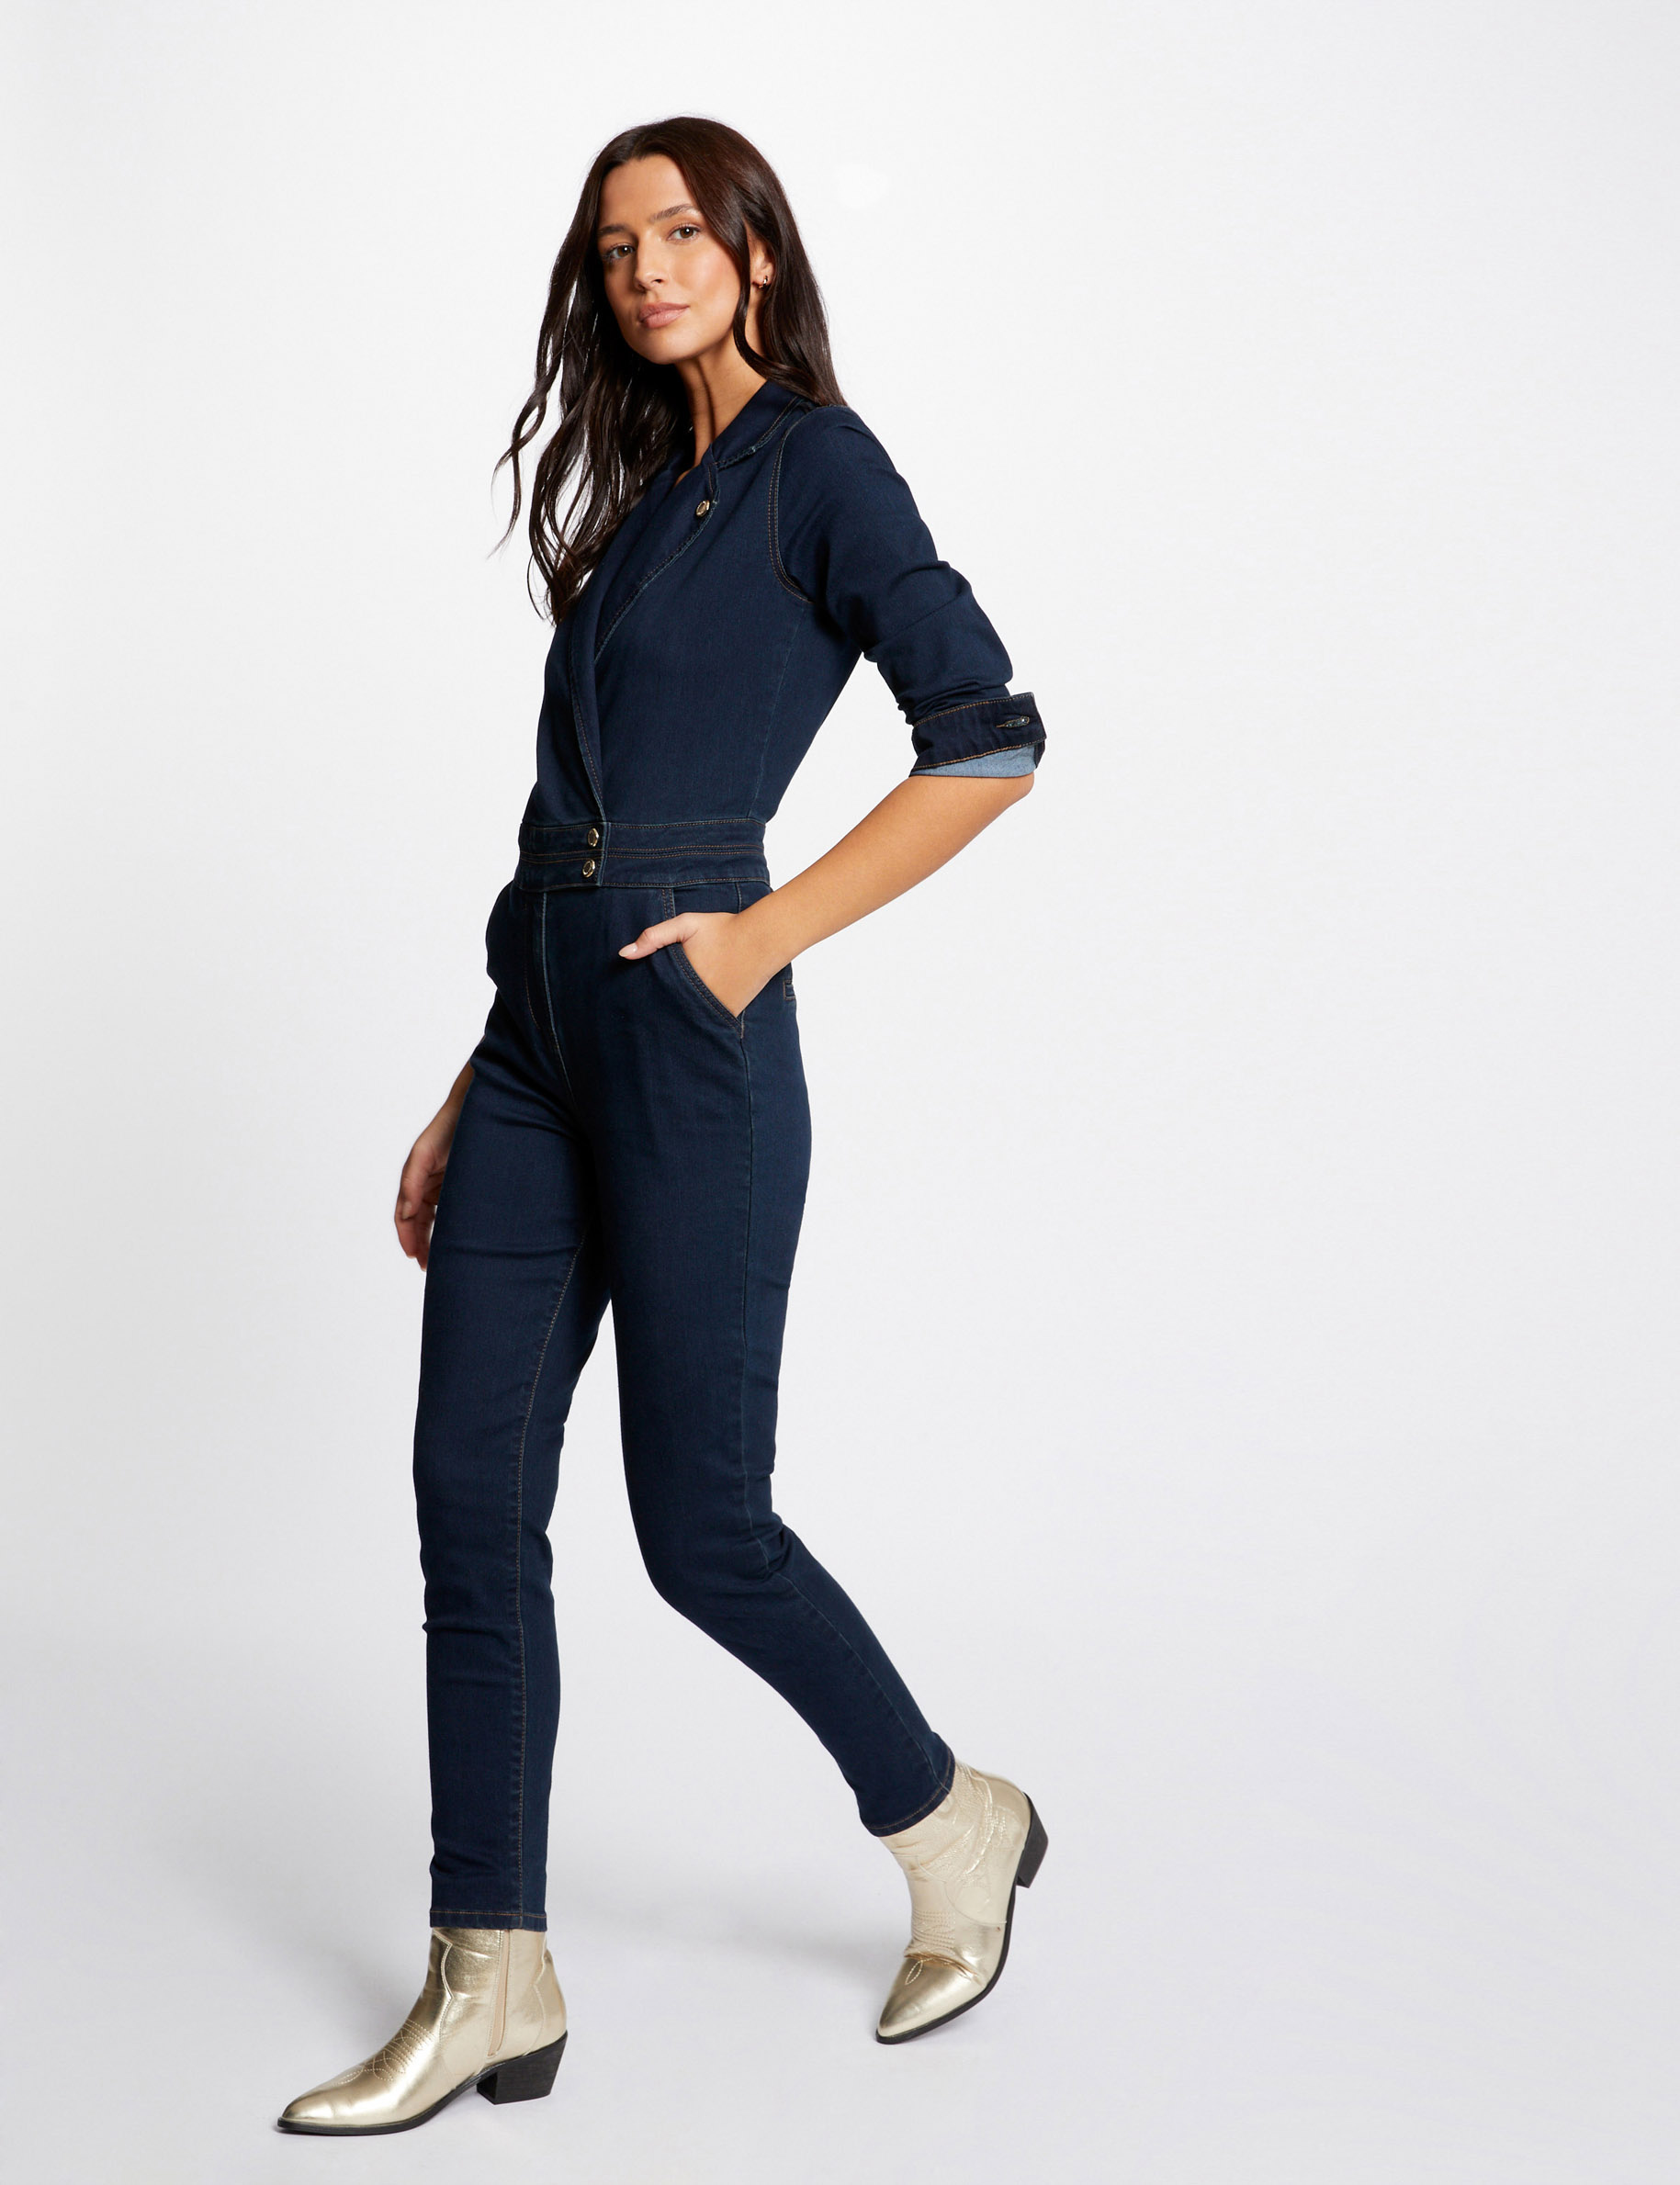 Blue Sleeveless Denim Revice Denim Jumpsuit For Women Wholesale Club Night  Wear Playsuit With Slim Fit Bodysuit Femme From Rebecco, $18.34 | DHgate.Com